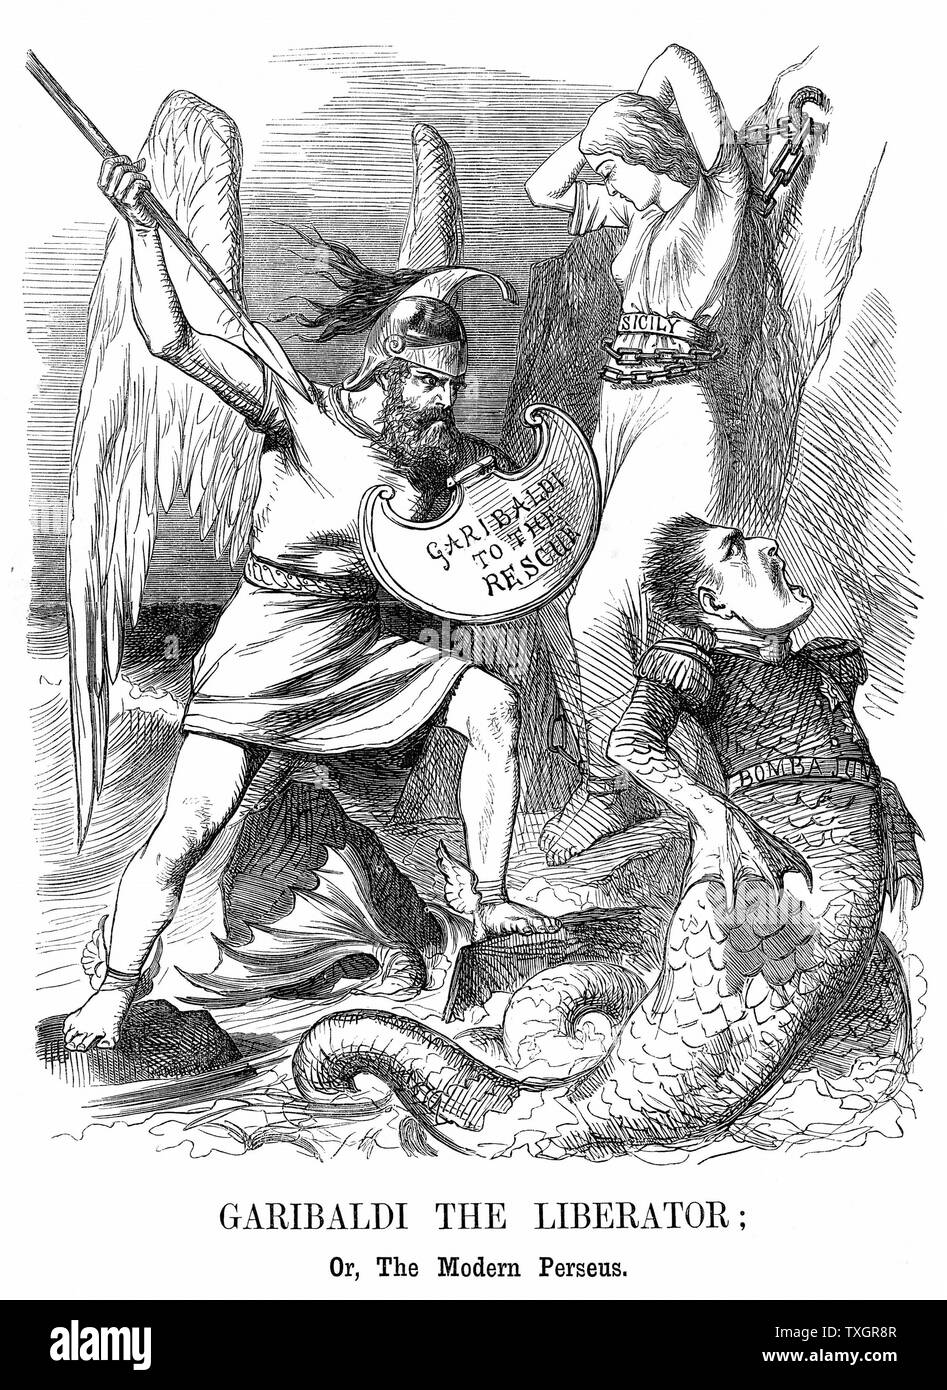 Unification of Italy: Giuseppe Garibaldi (1807-82), Italian Patriot, conquering Sicily and Naples on behalf of the new kingdom of Italy John Tenniel cartoon from 'Punch' 16 June 1860 Wood engraving   London Stock Photo